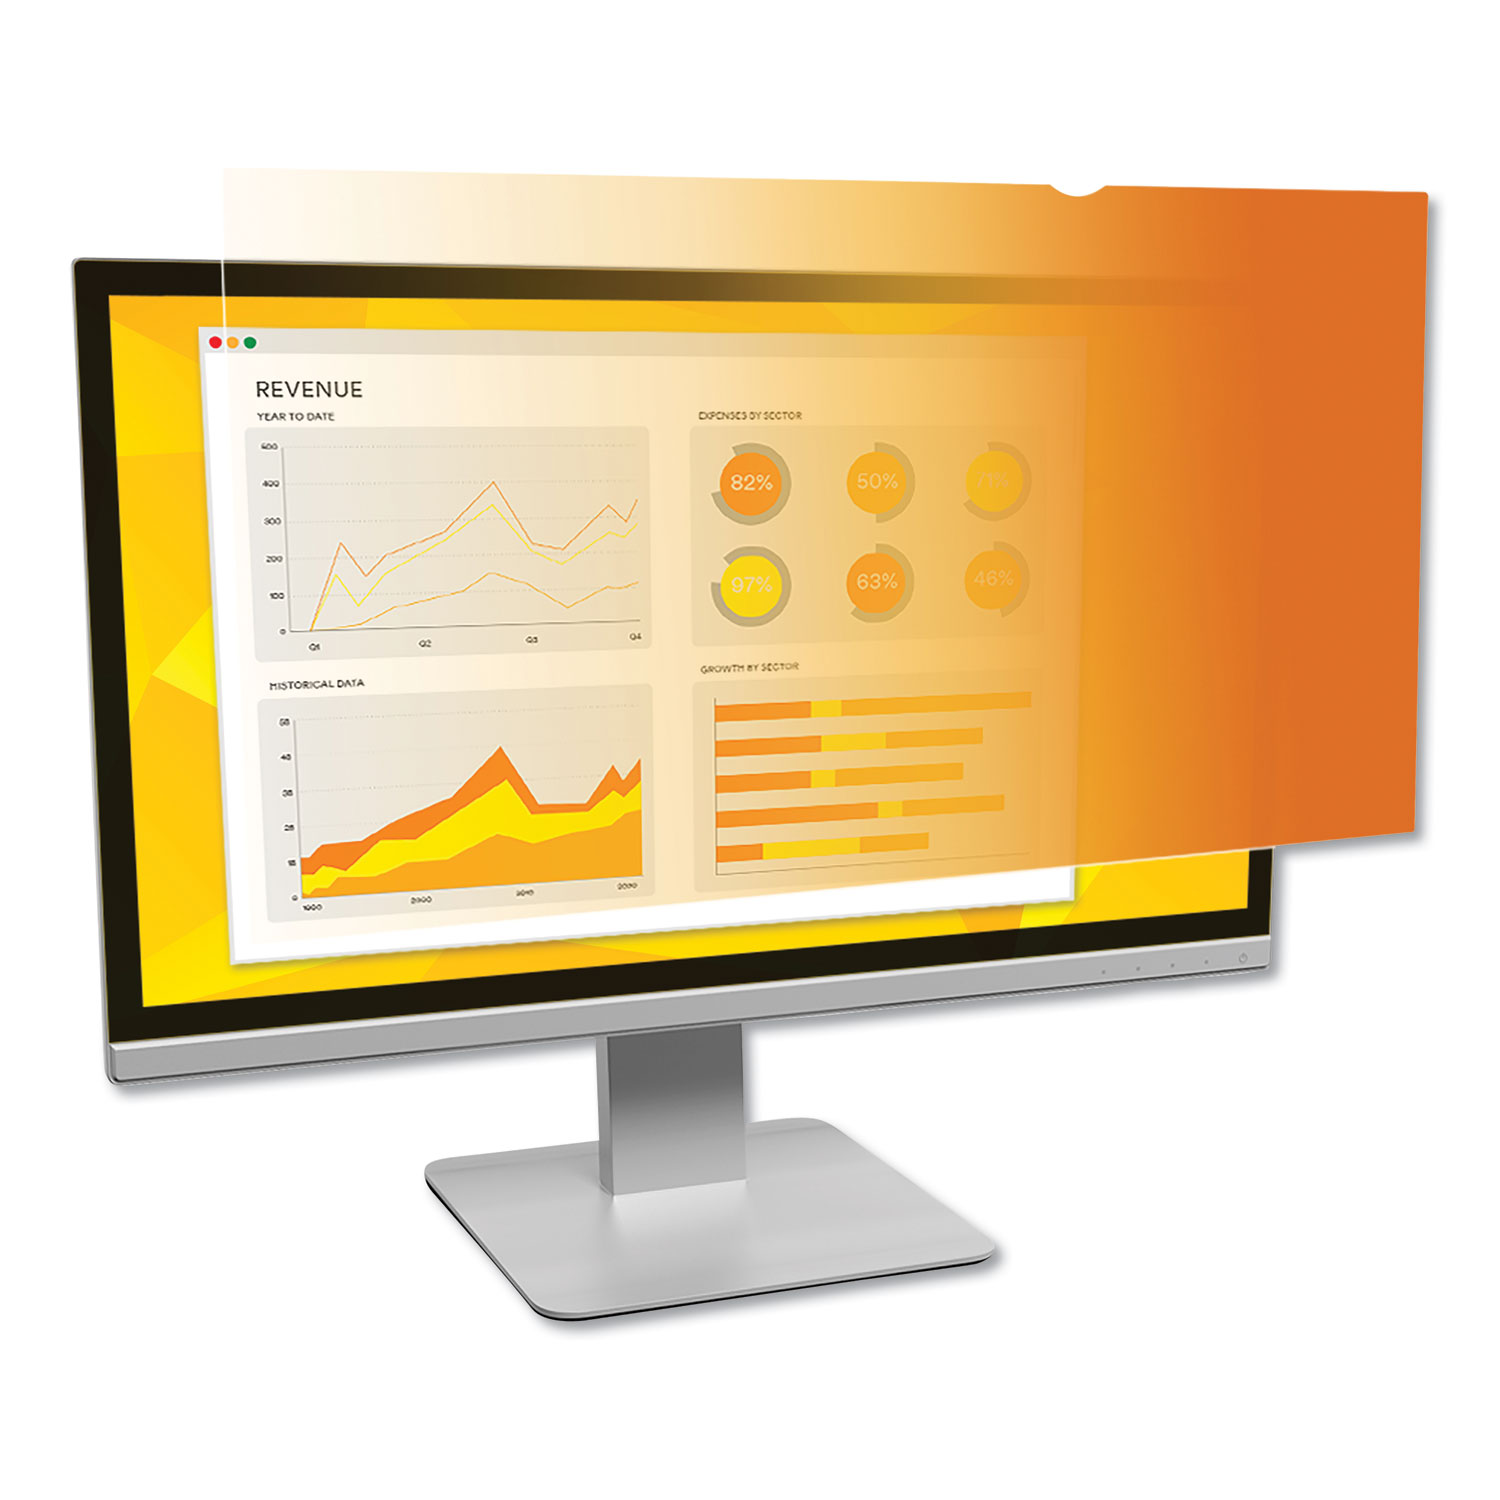 Gold Frameless Privacy Filter for 24" Widescreen Monitor, 16:10 Aspect Ratio